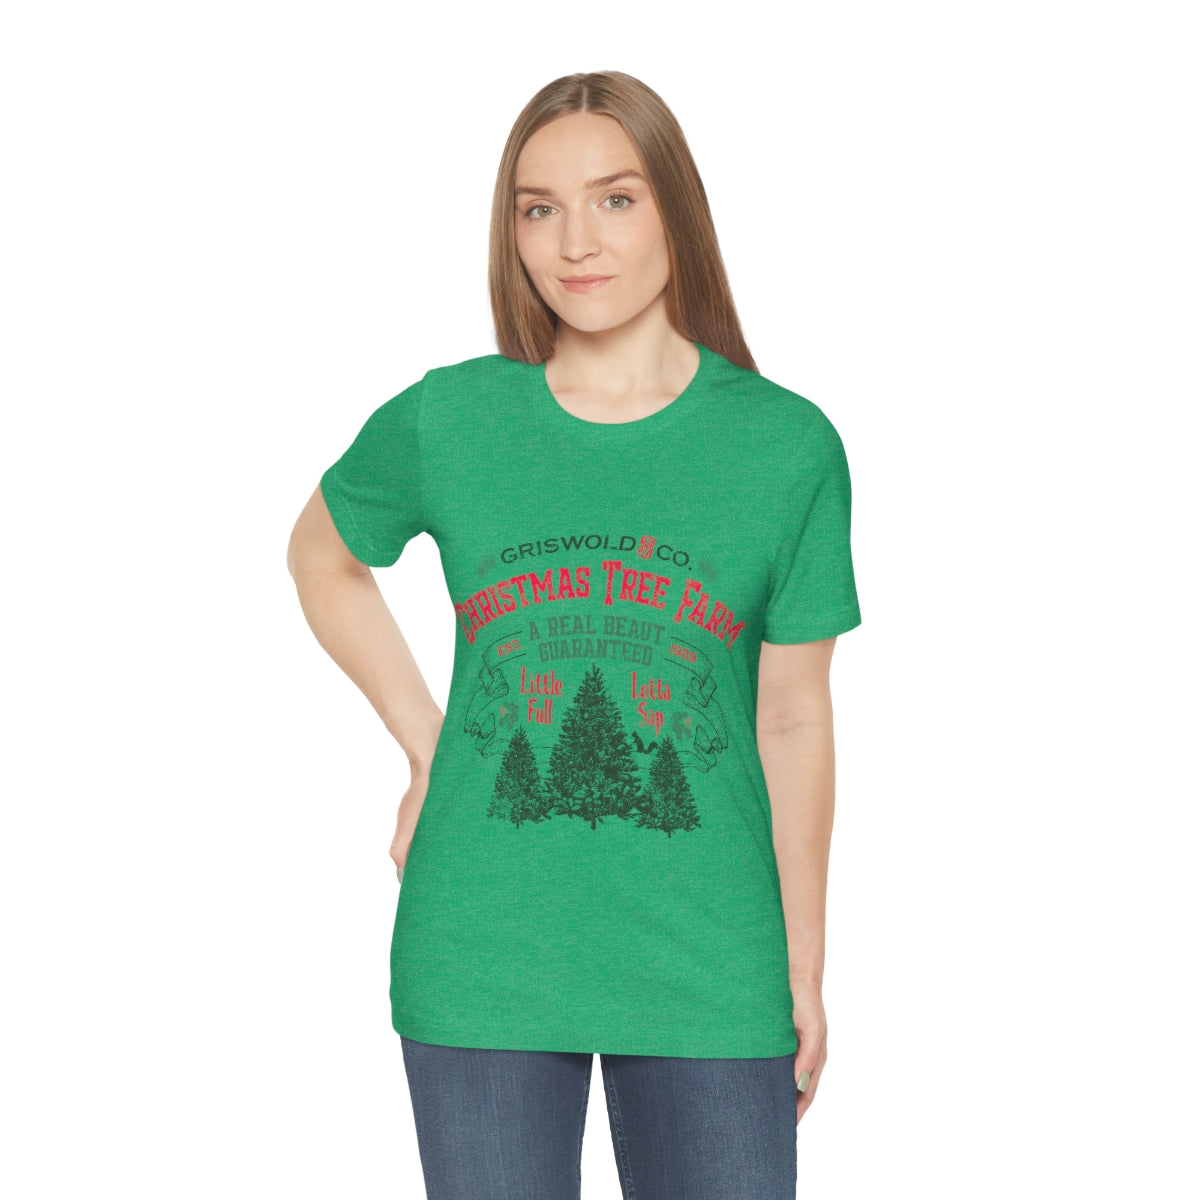 Griswold Christmas Tree Farm Unisex Jersey Short Sleeve Tee Christmas Vacation Griswold trees